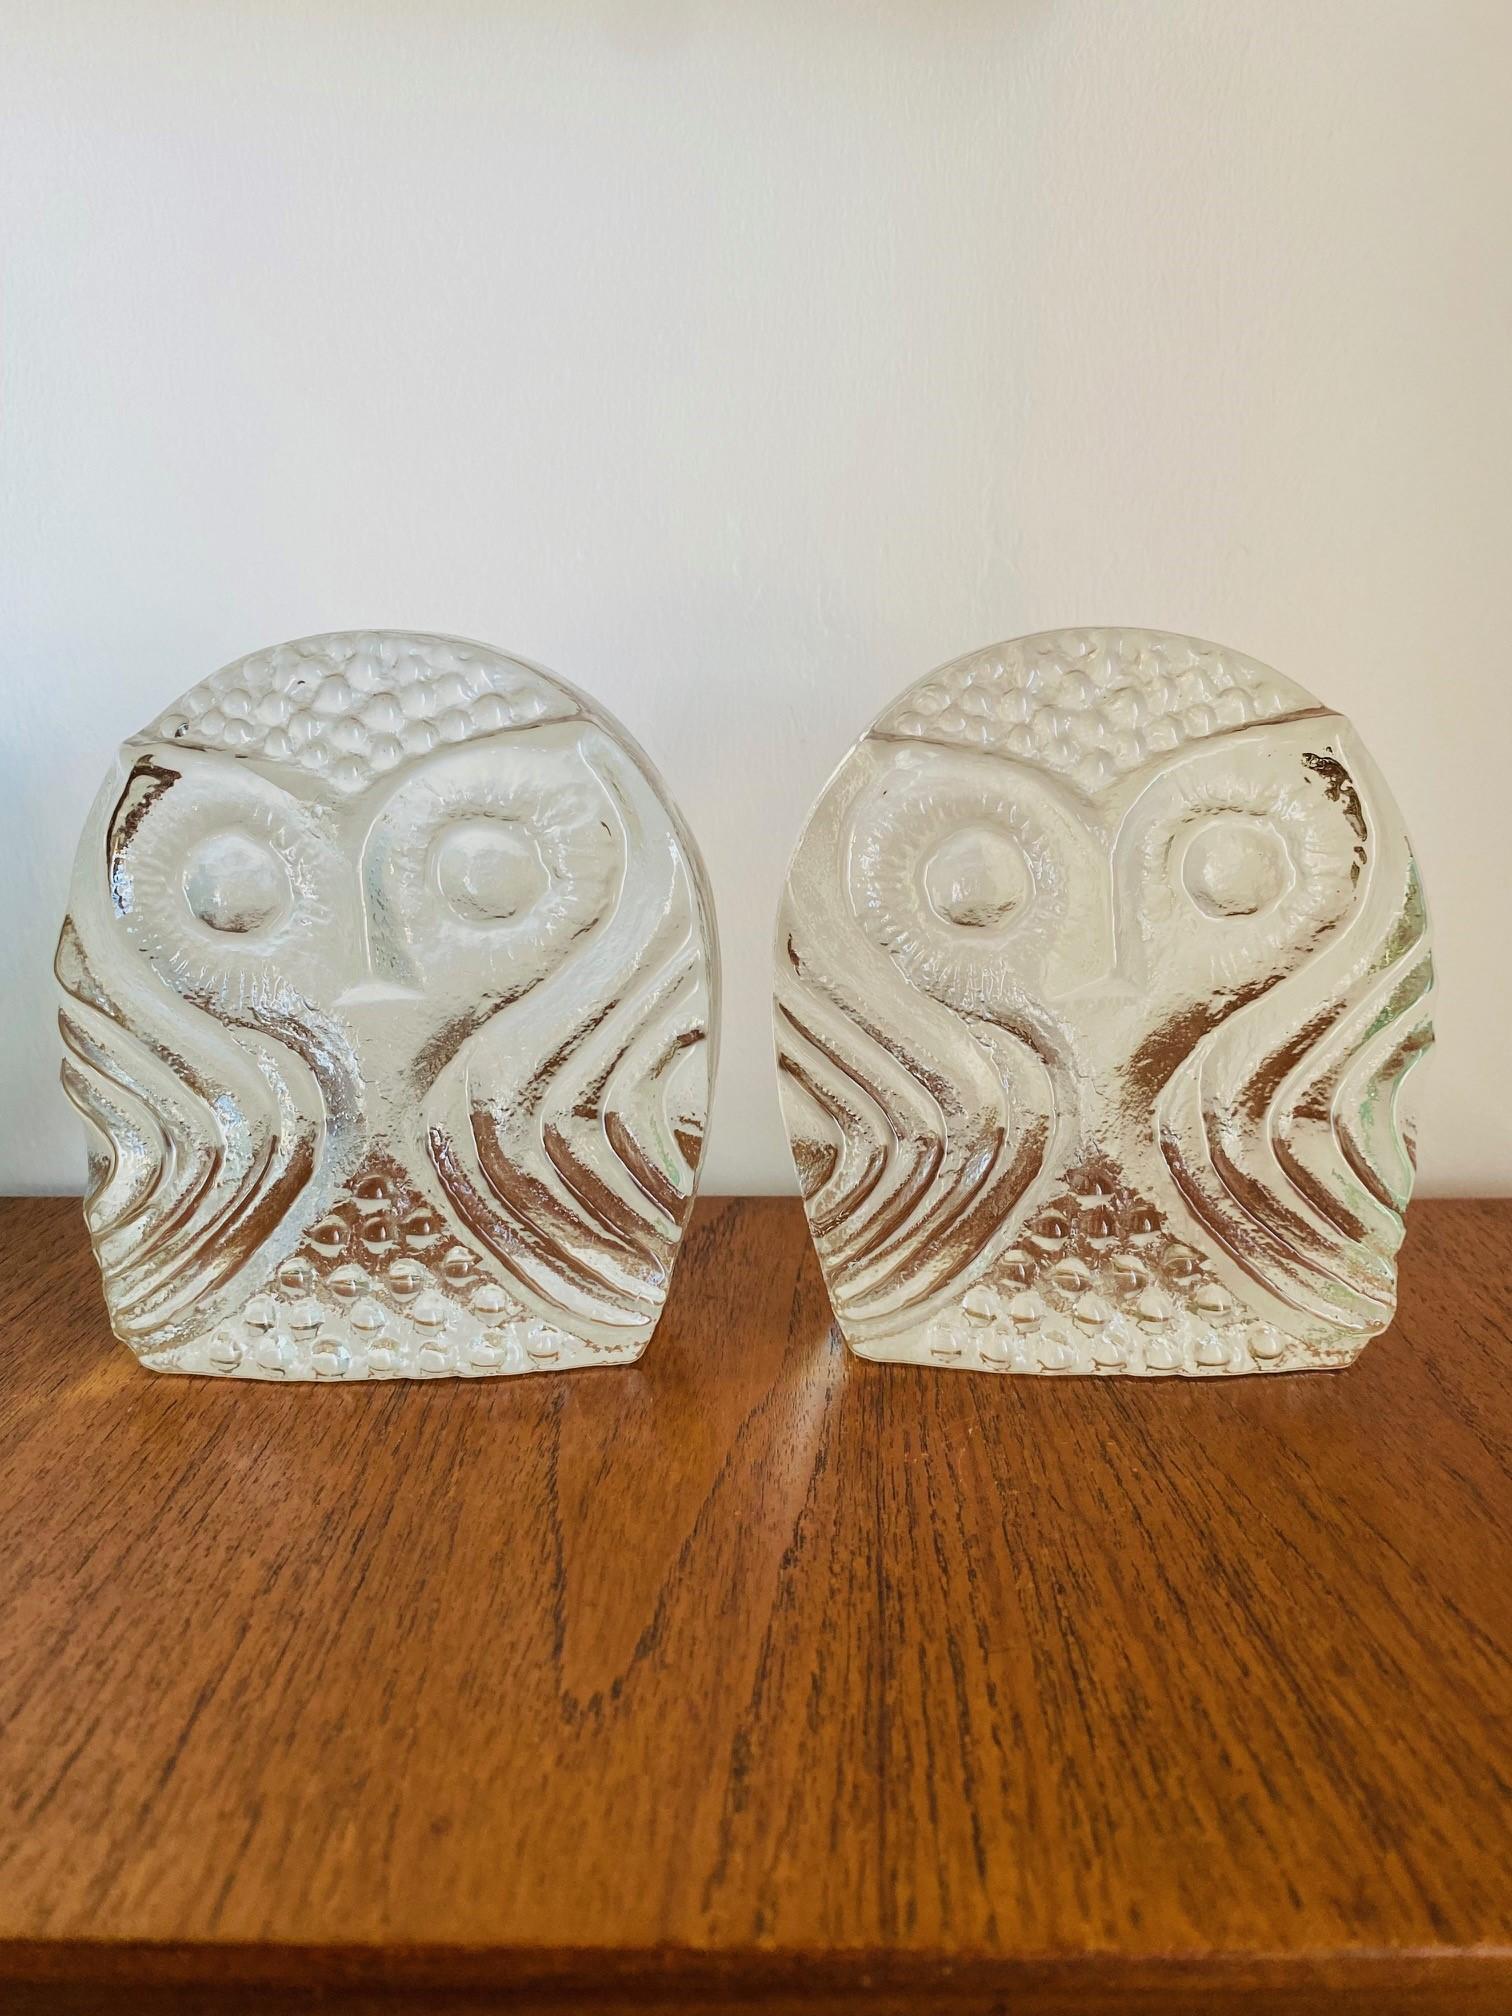 American Vintage Midcentury Glass Owl Bookends by Blenko For Sale